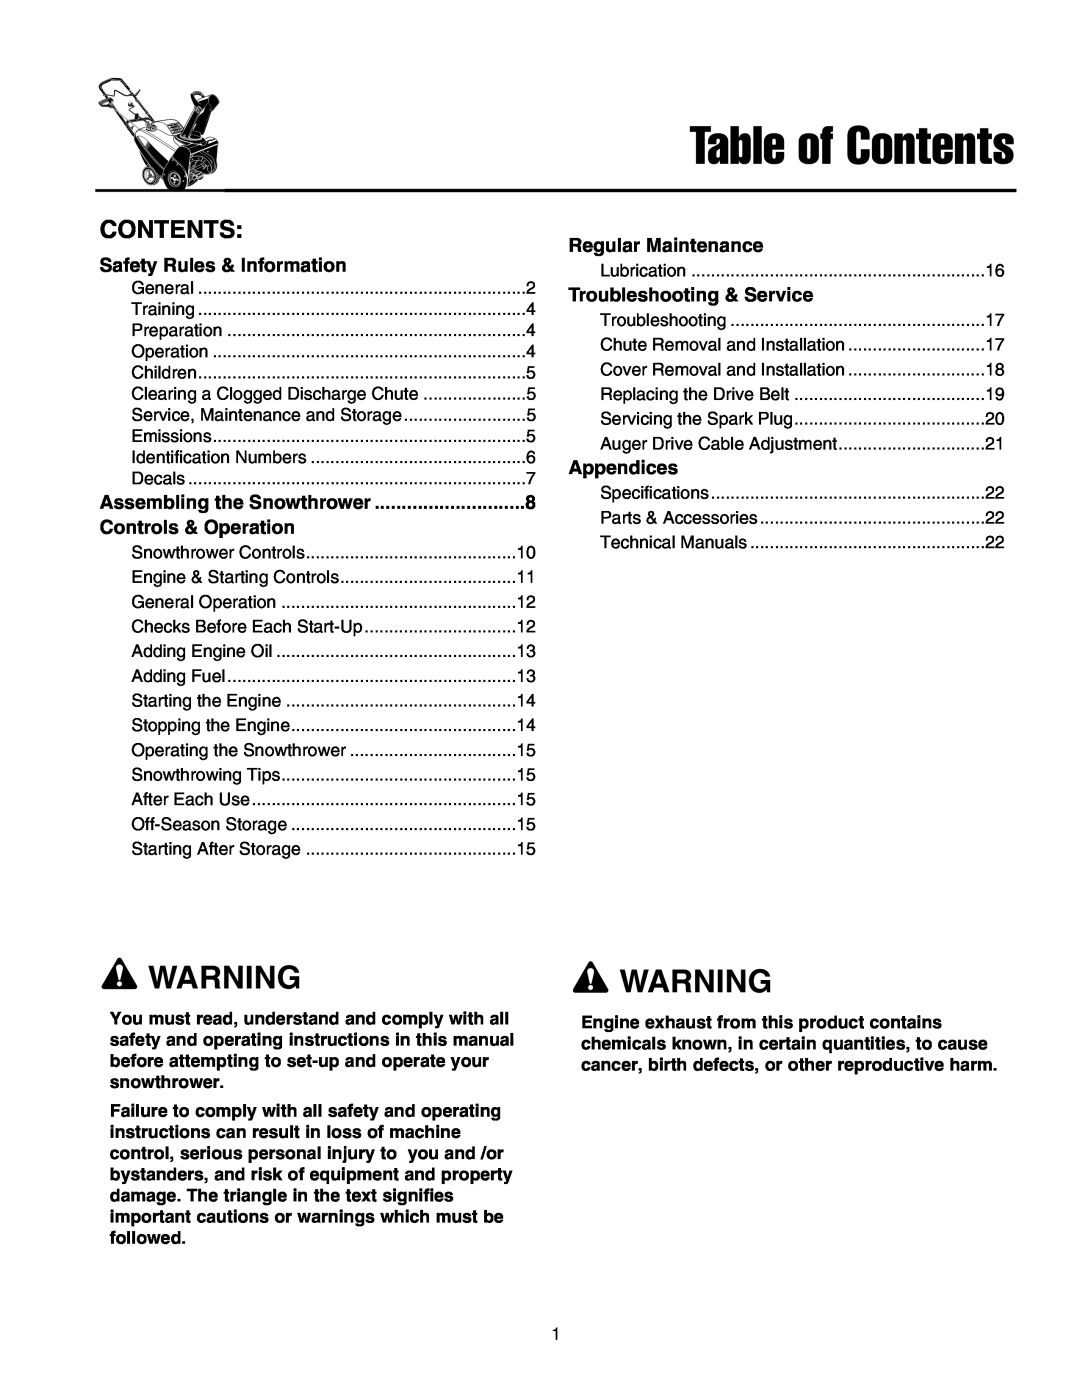 Simplicity 522E Warning Warning, Table of Contents, Safety Rules & Information, Controls & Operation, Appendices 